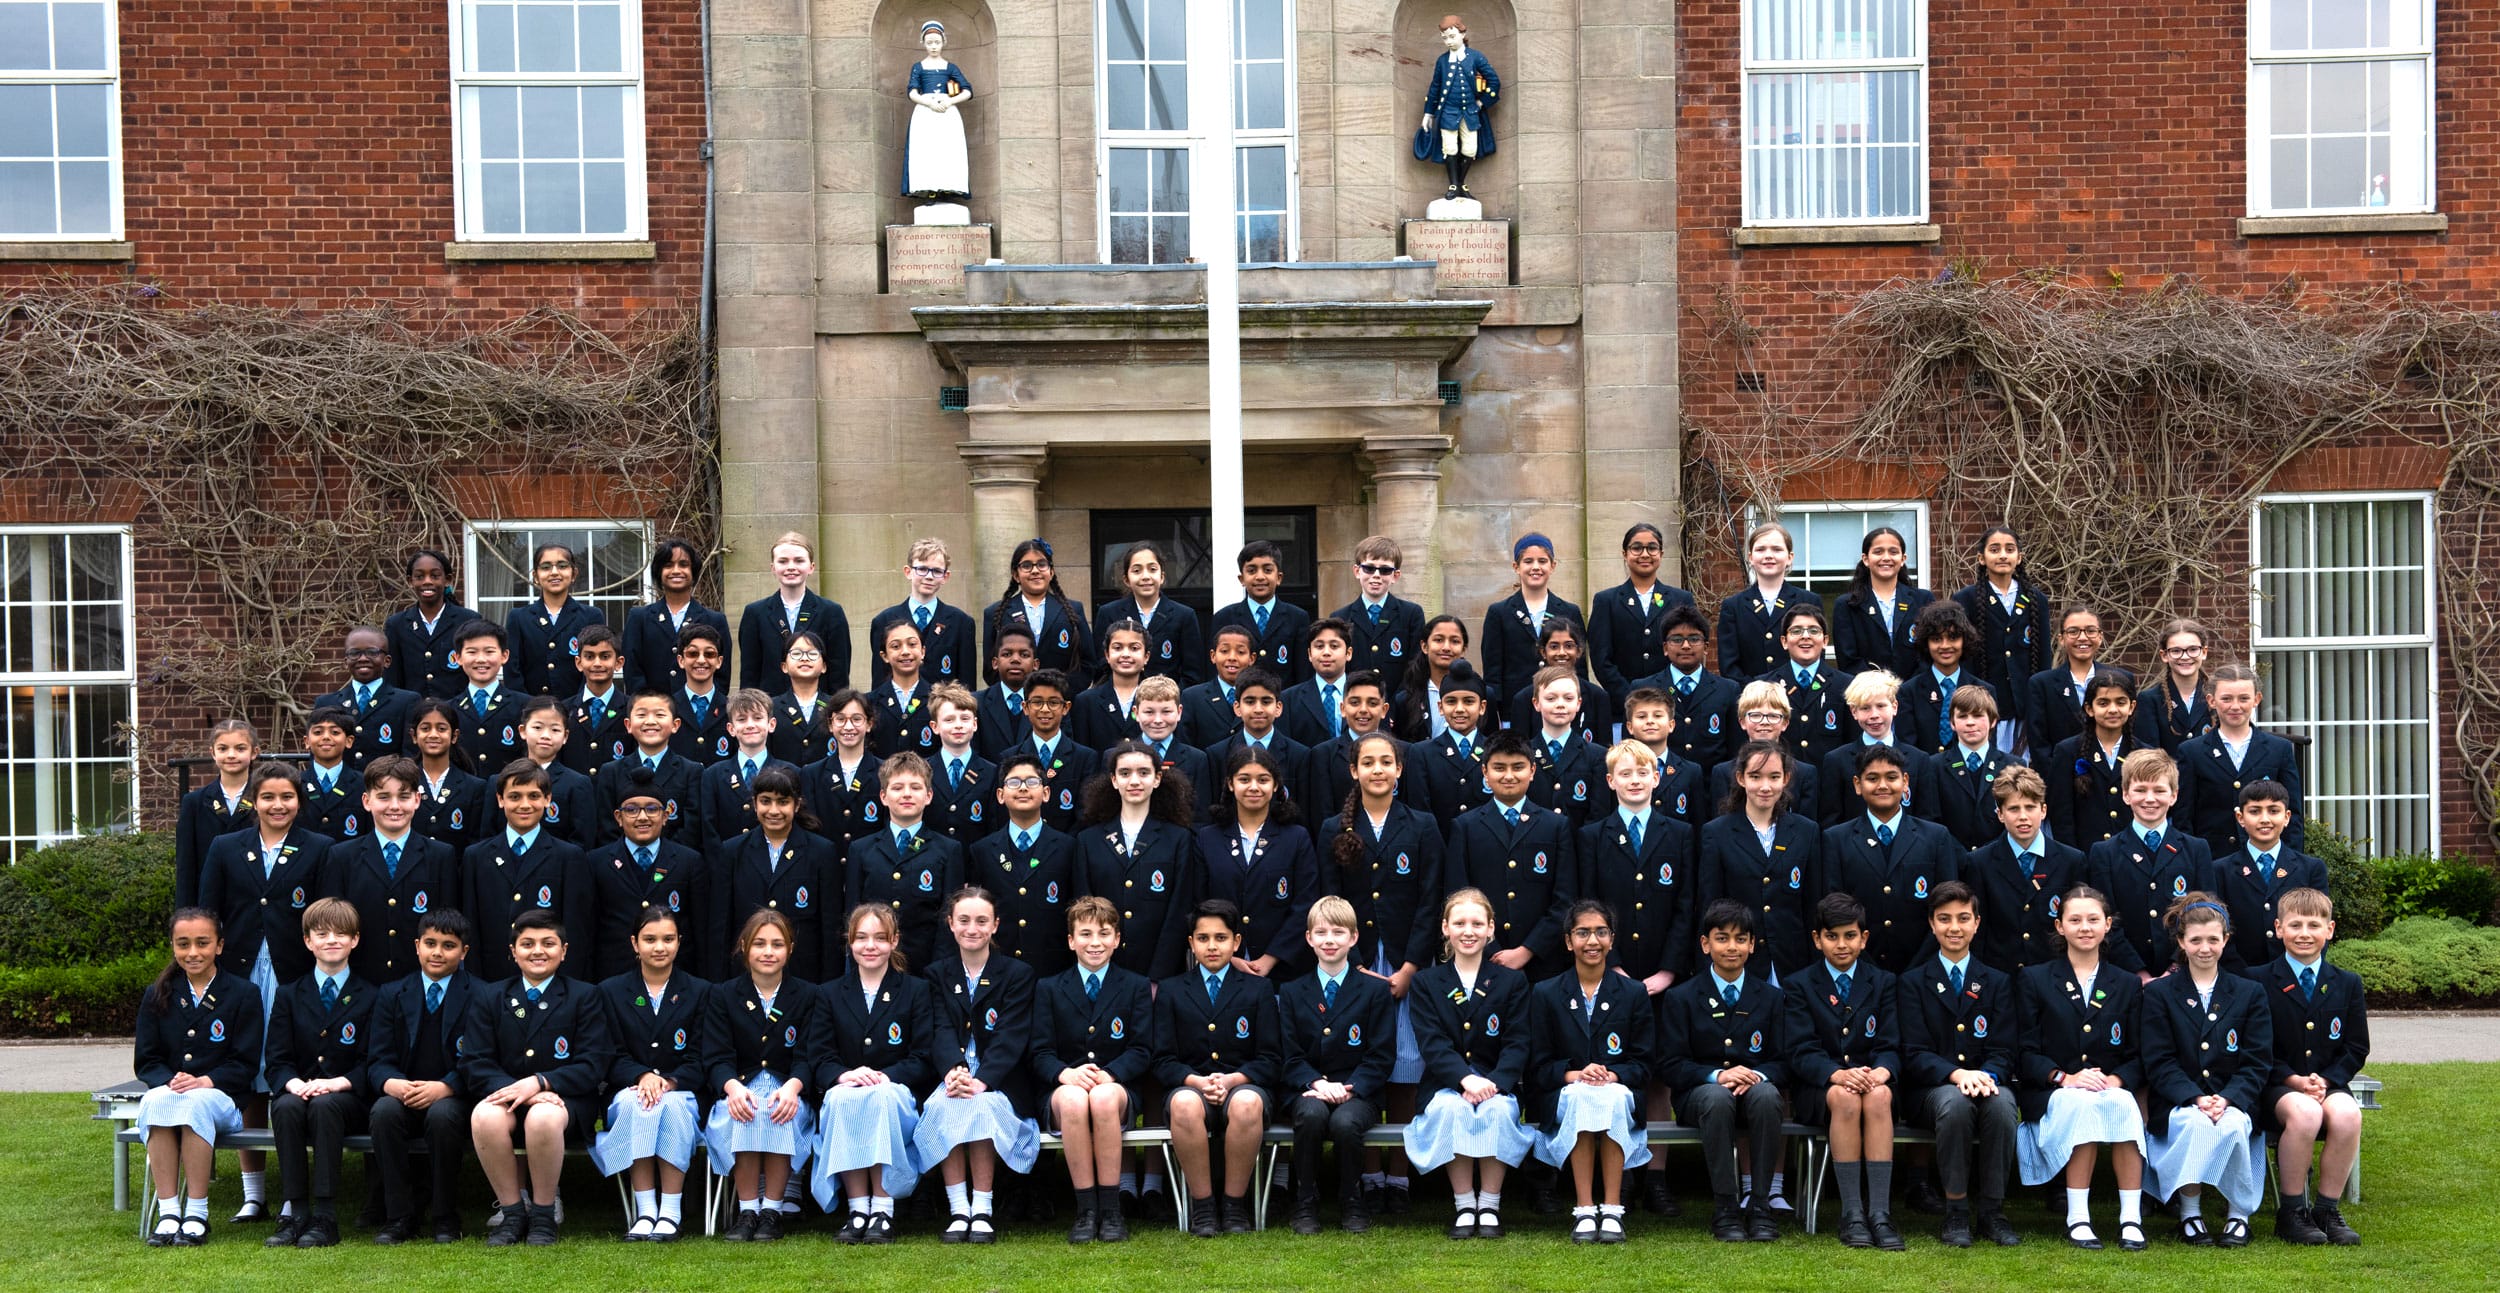 The Year 6 Class of 2023 sat in front of The Blue Coat School